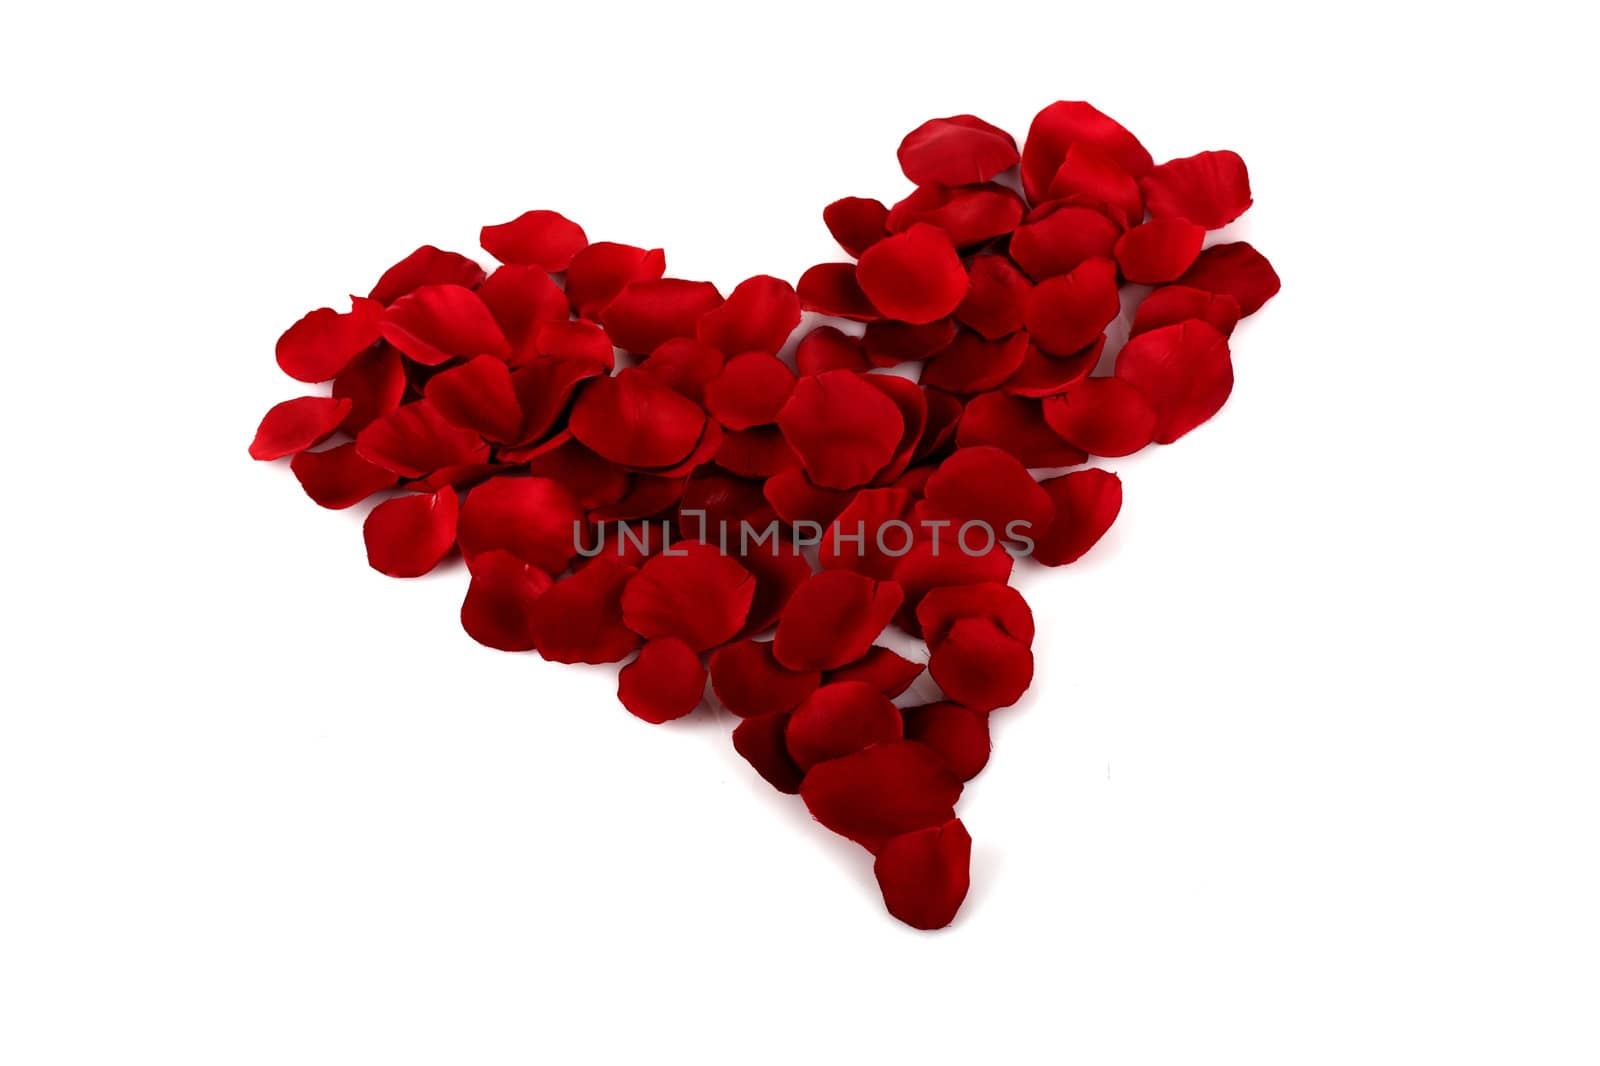 Heart made with red rose petals